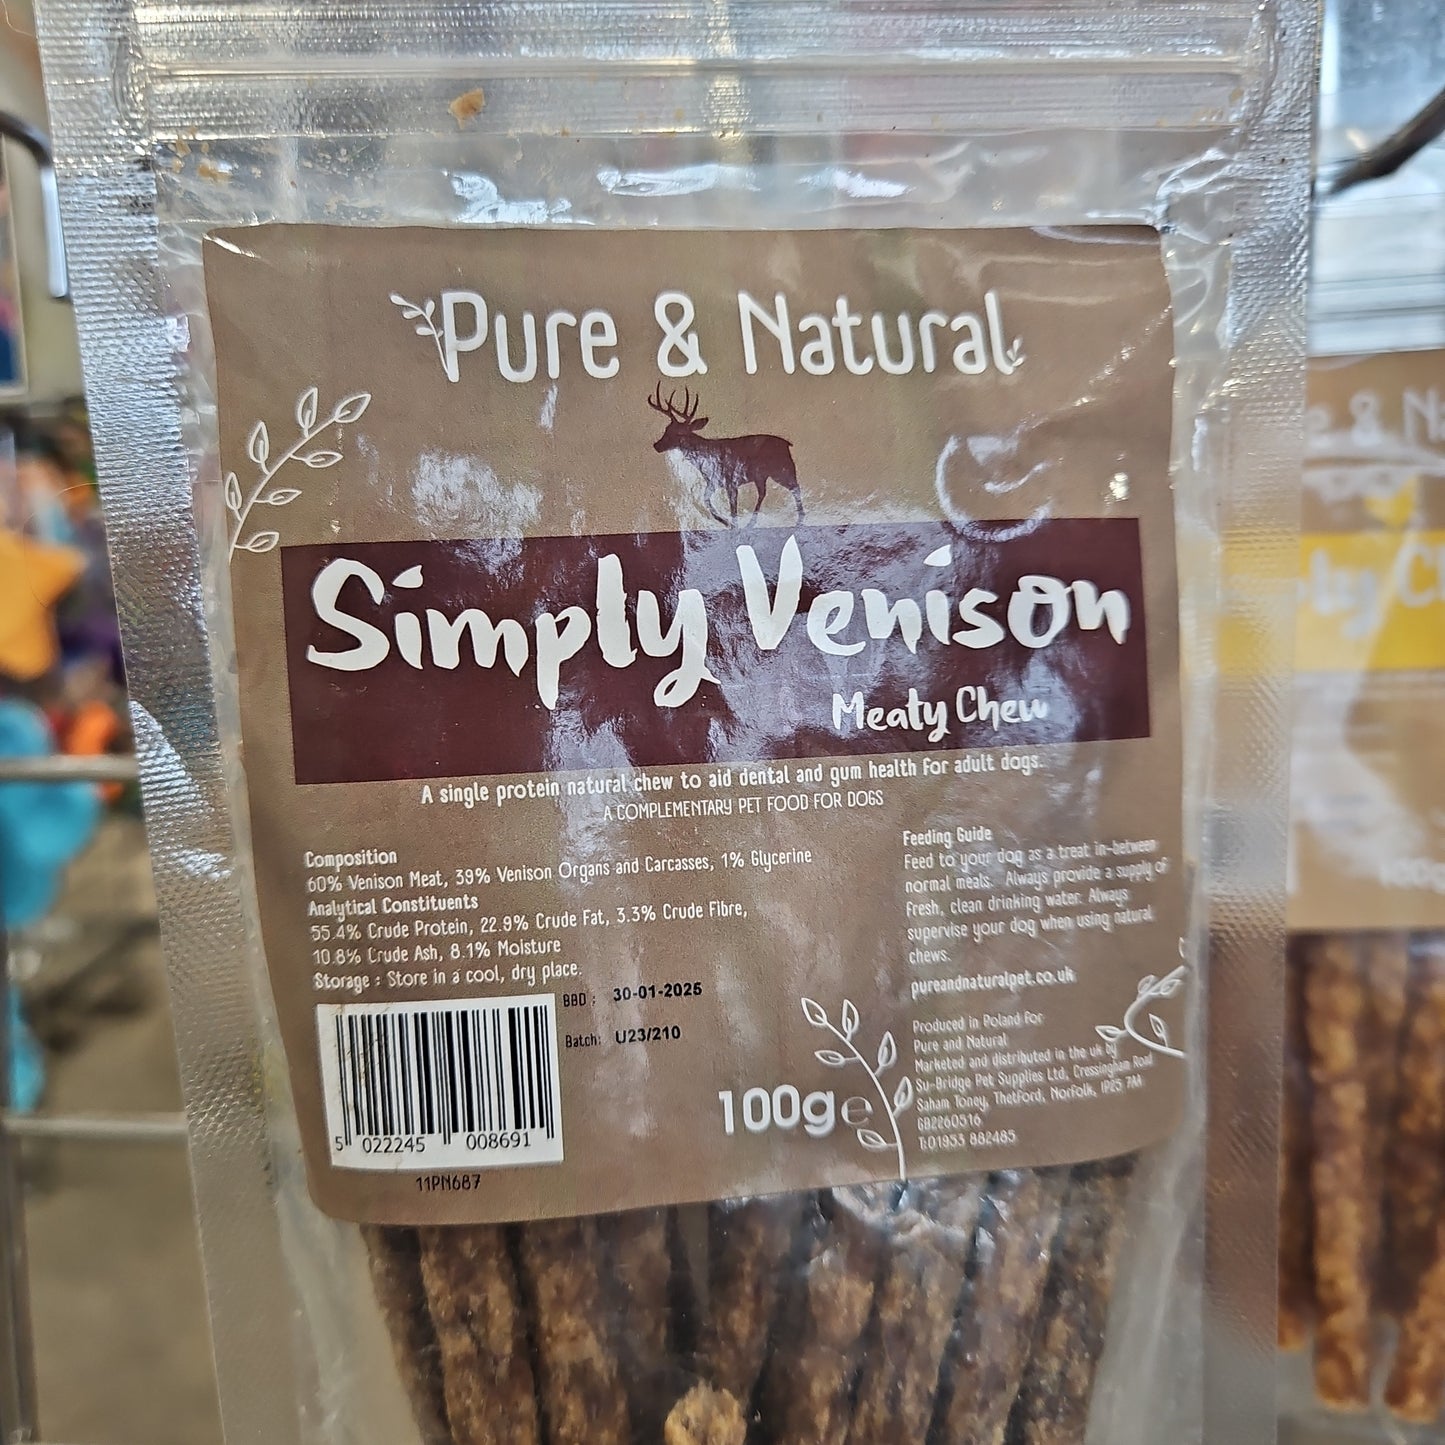 Pure & Natural meaty sticks 100g